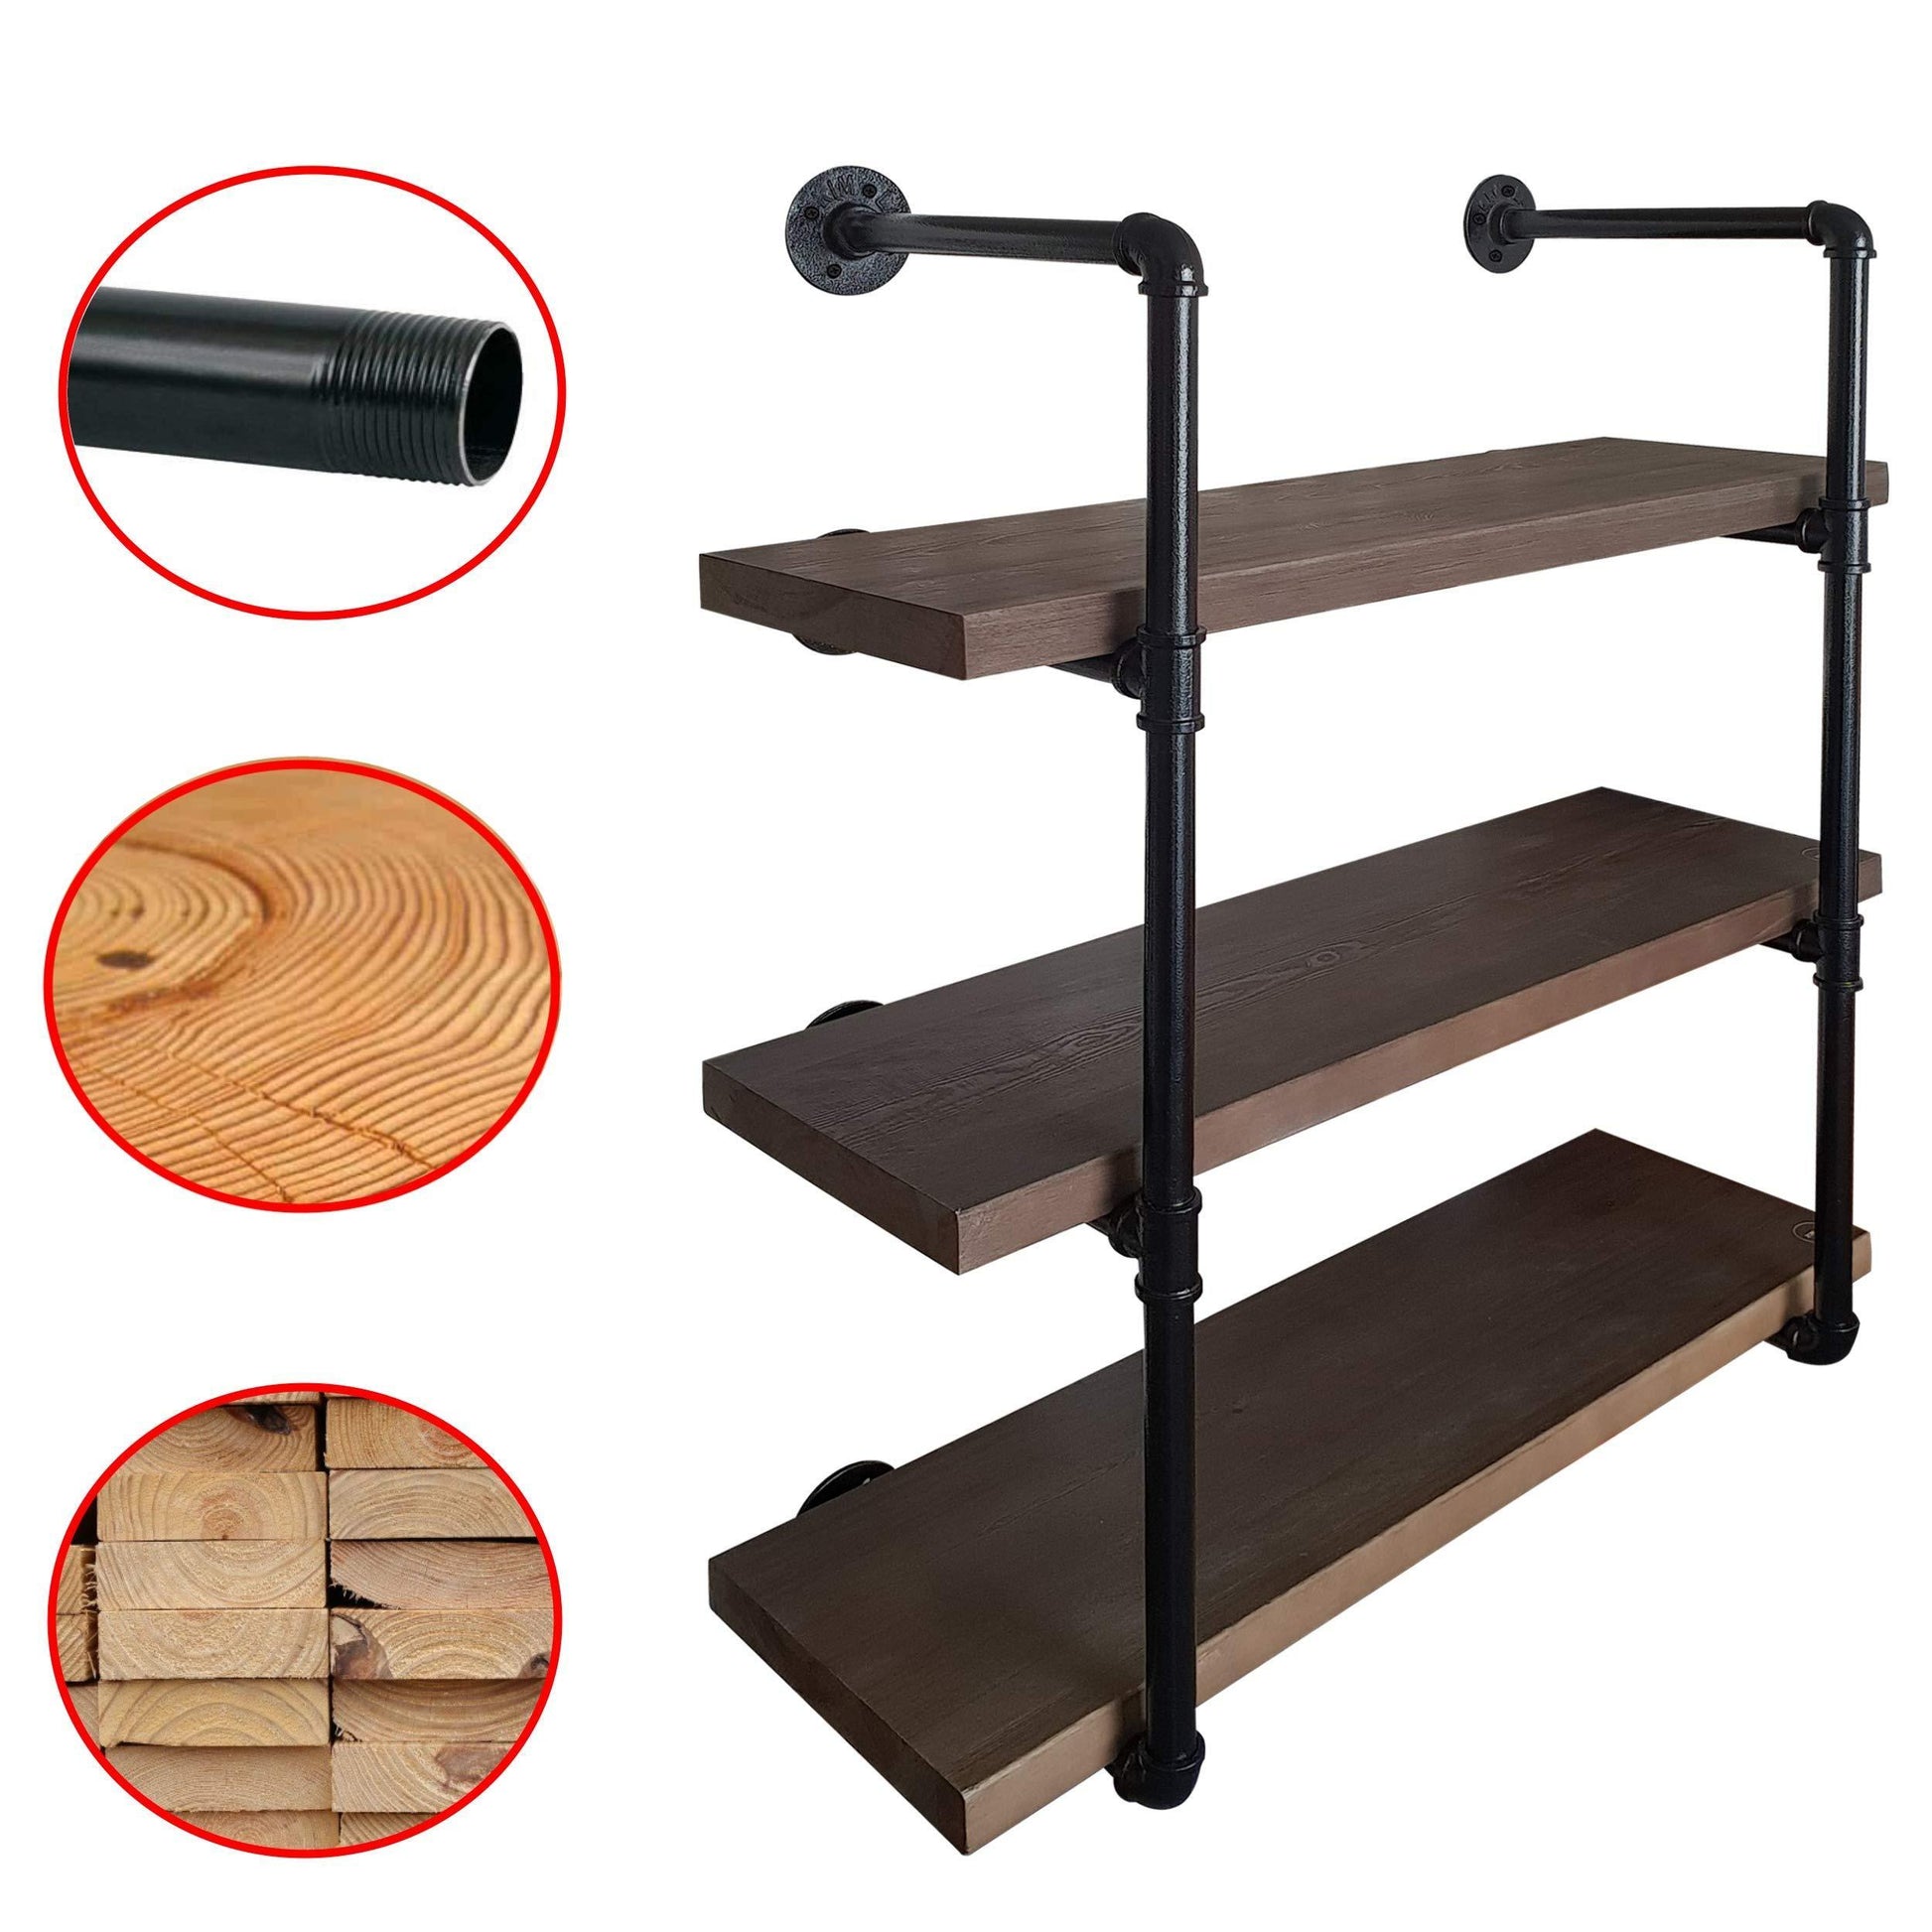 Great 2choice industrial pipe shelving rustic shelves solid canadian wood vintage sleek pipe shelves for floating bookshelf kitchen living room versatile home decor wall mounted storage 3 tier